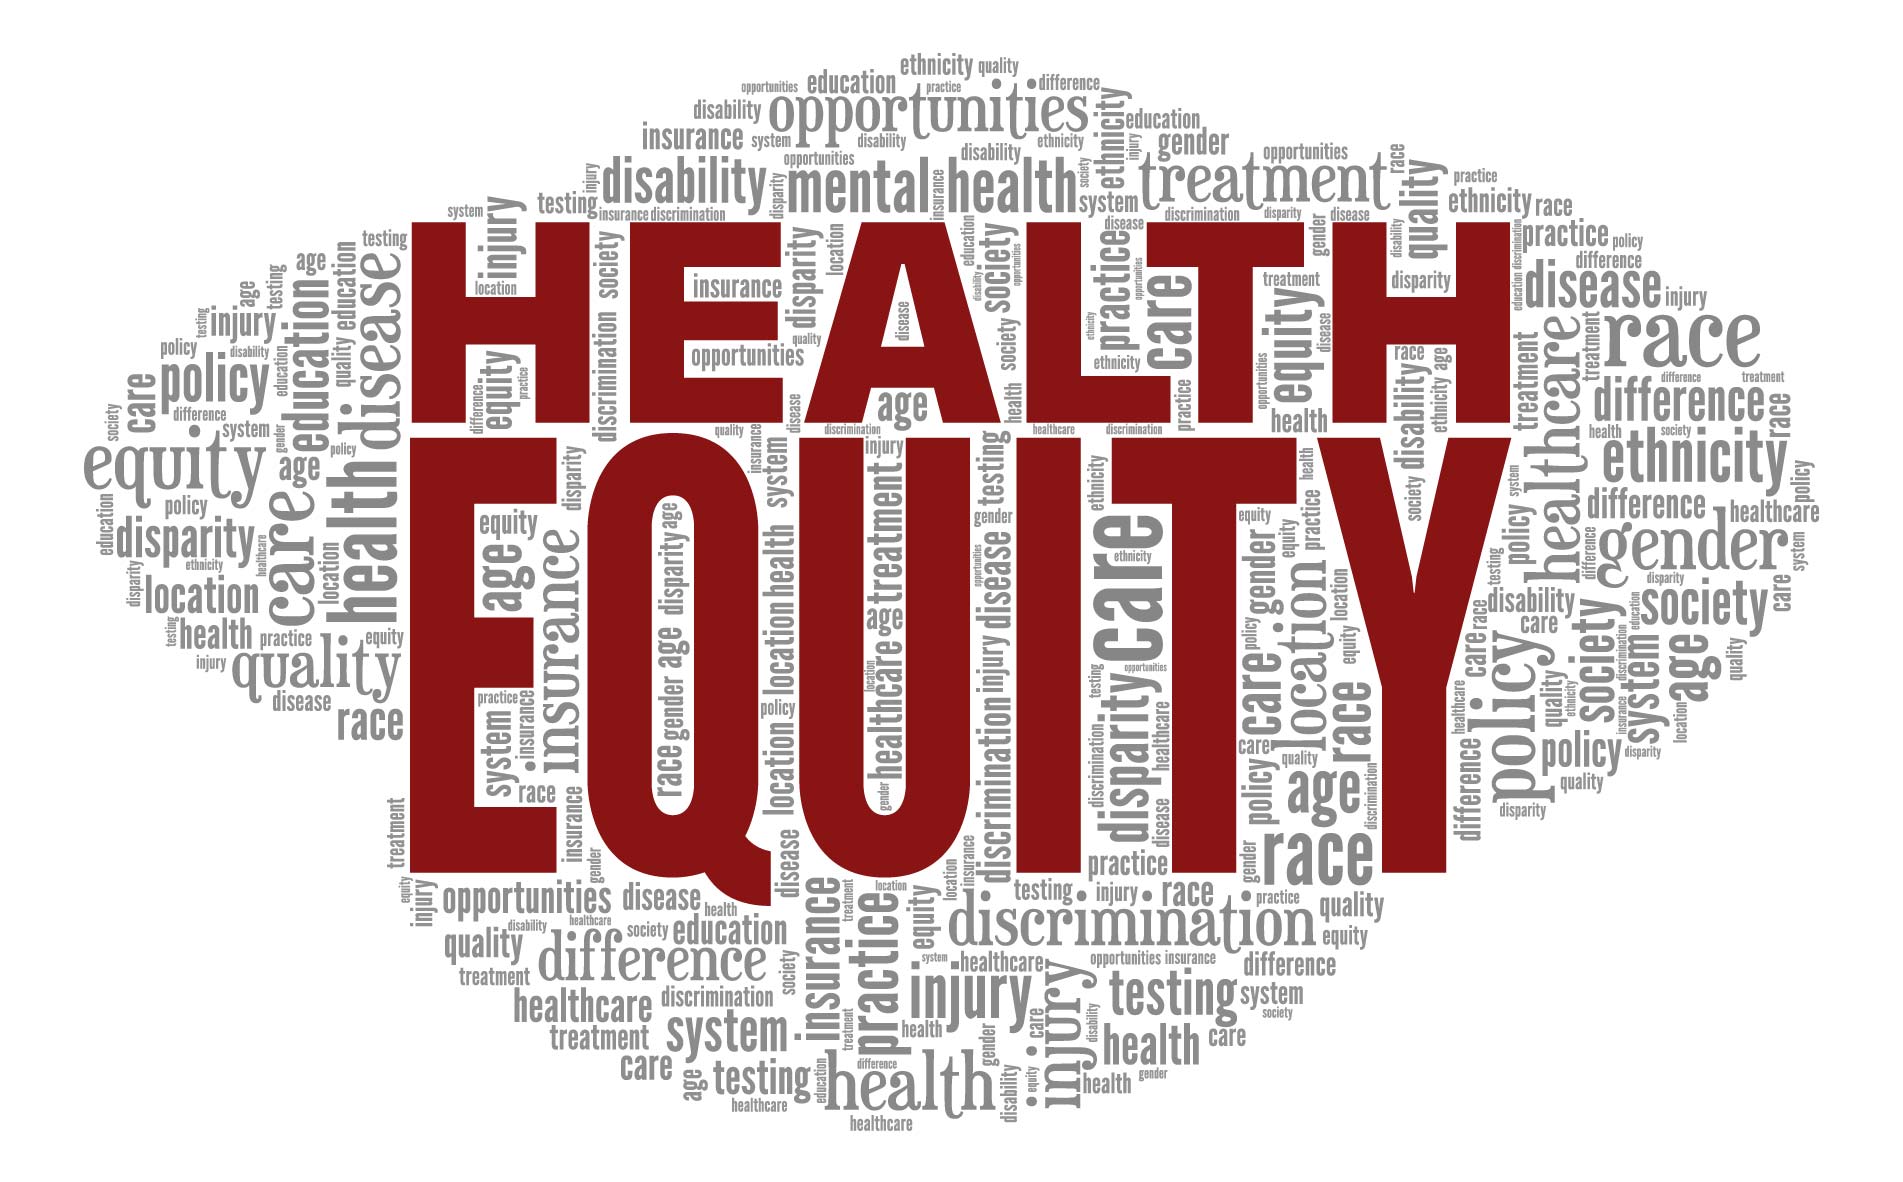 A word collage of related terms pertaining to health equity.